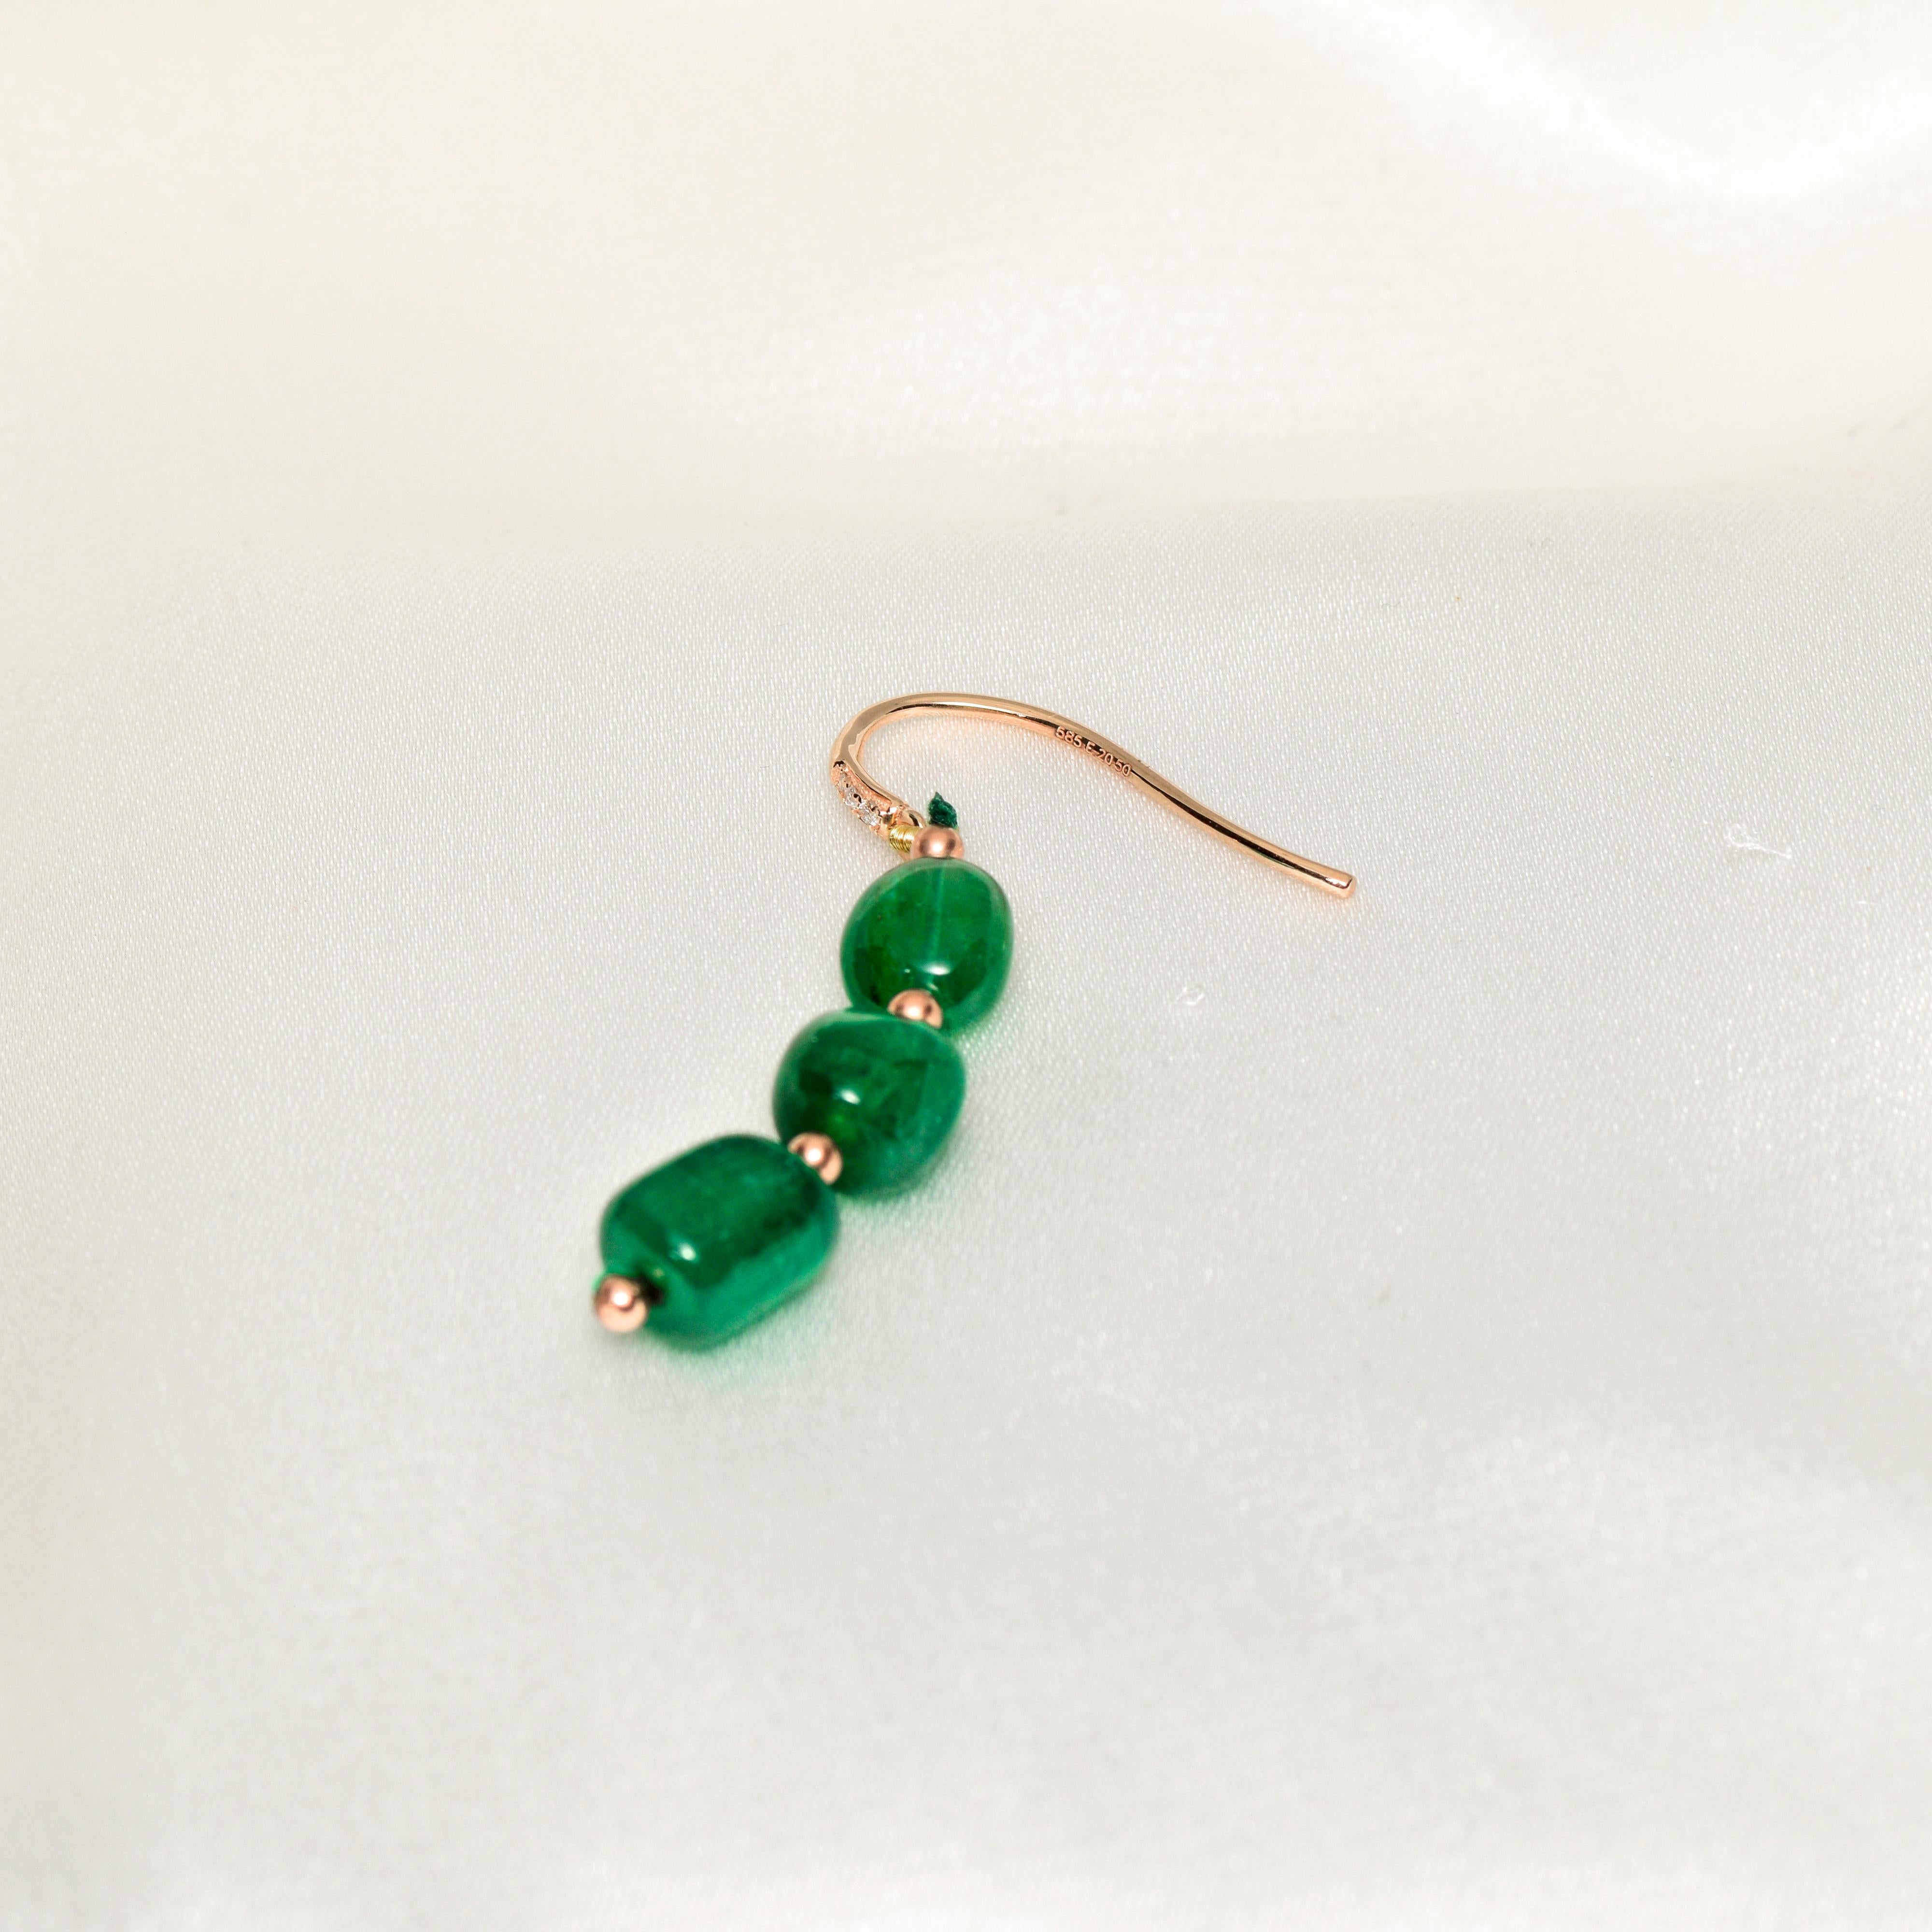 IGI 14K 20.50 Ct Emerald&Diamonds Antique Art Deco Style Hook Earrings In New Condition For Sale In Kaohsiung City, TW